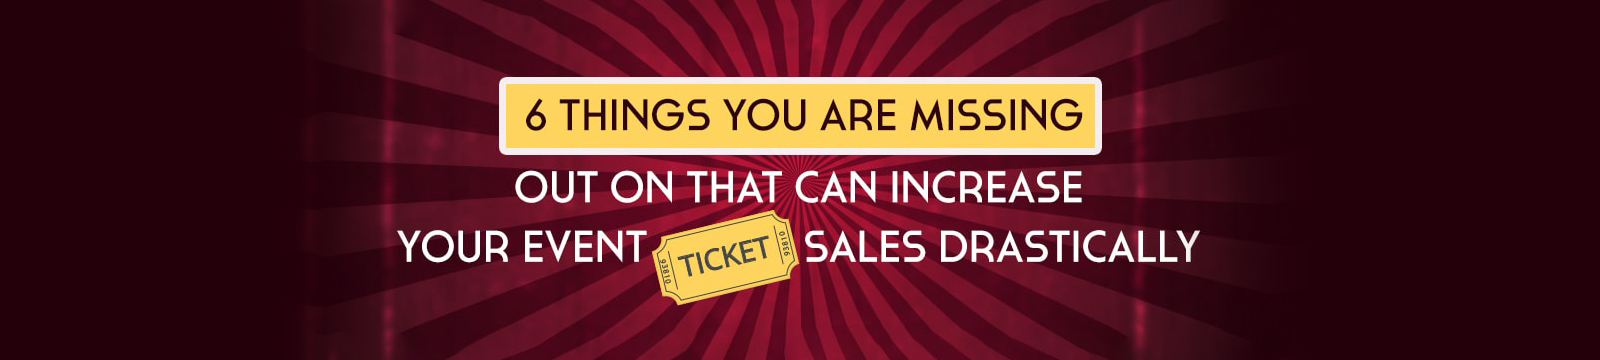 6 Secrets to increase your Event Ticket Sales drastically